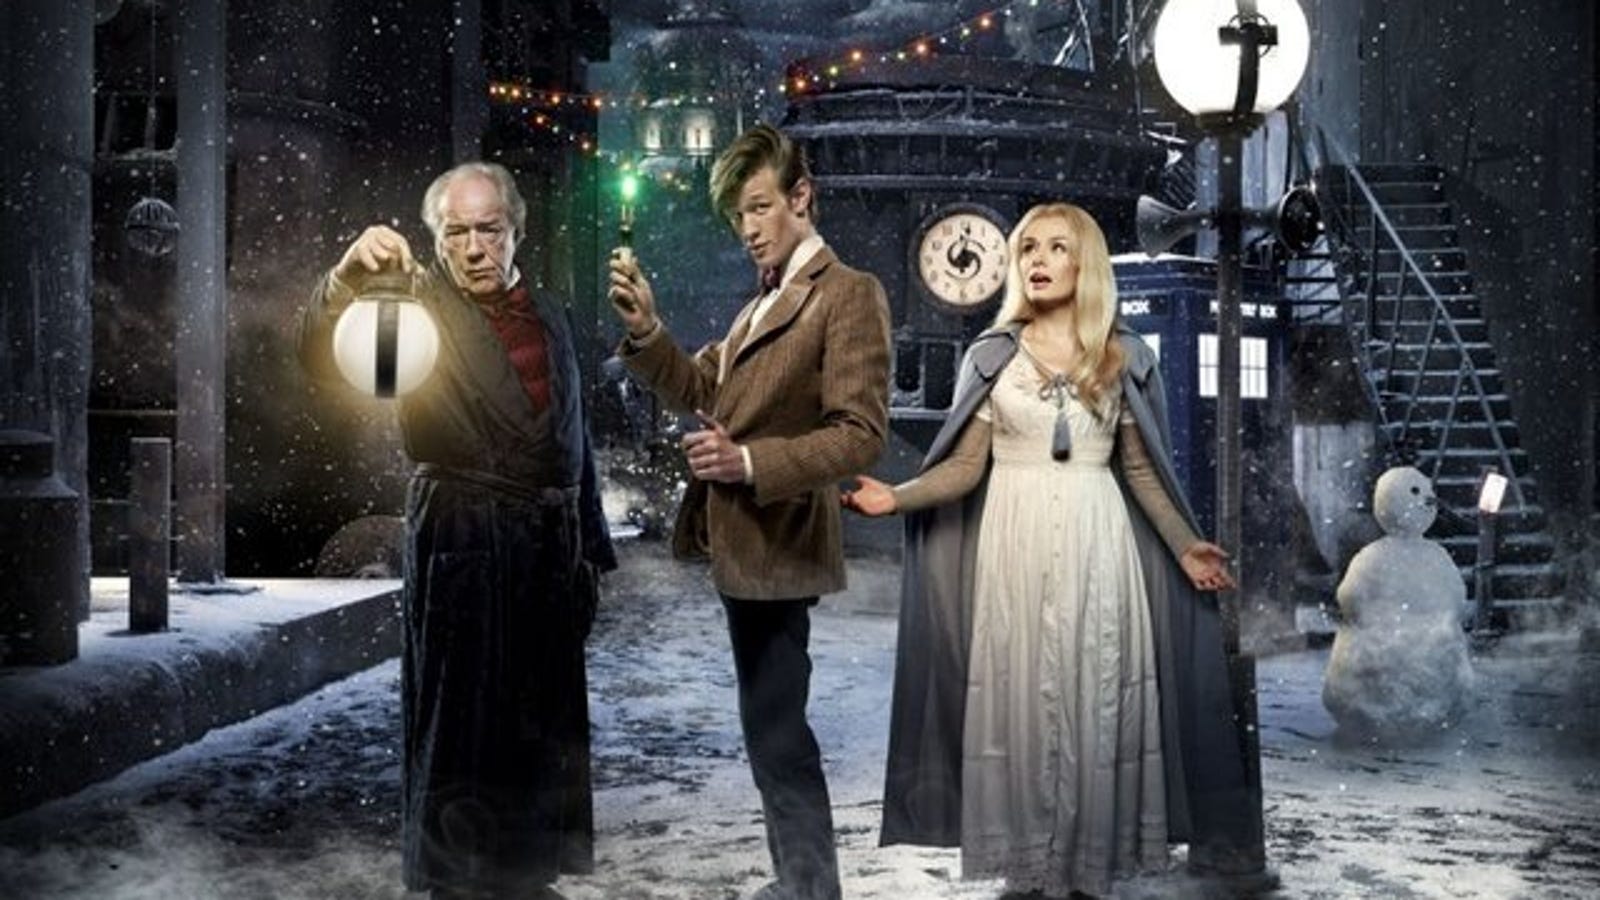 The Most Wondrous Doctor Who Christmas Special Yet